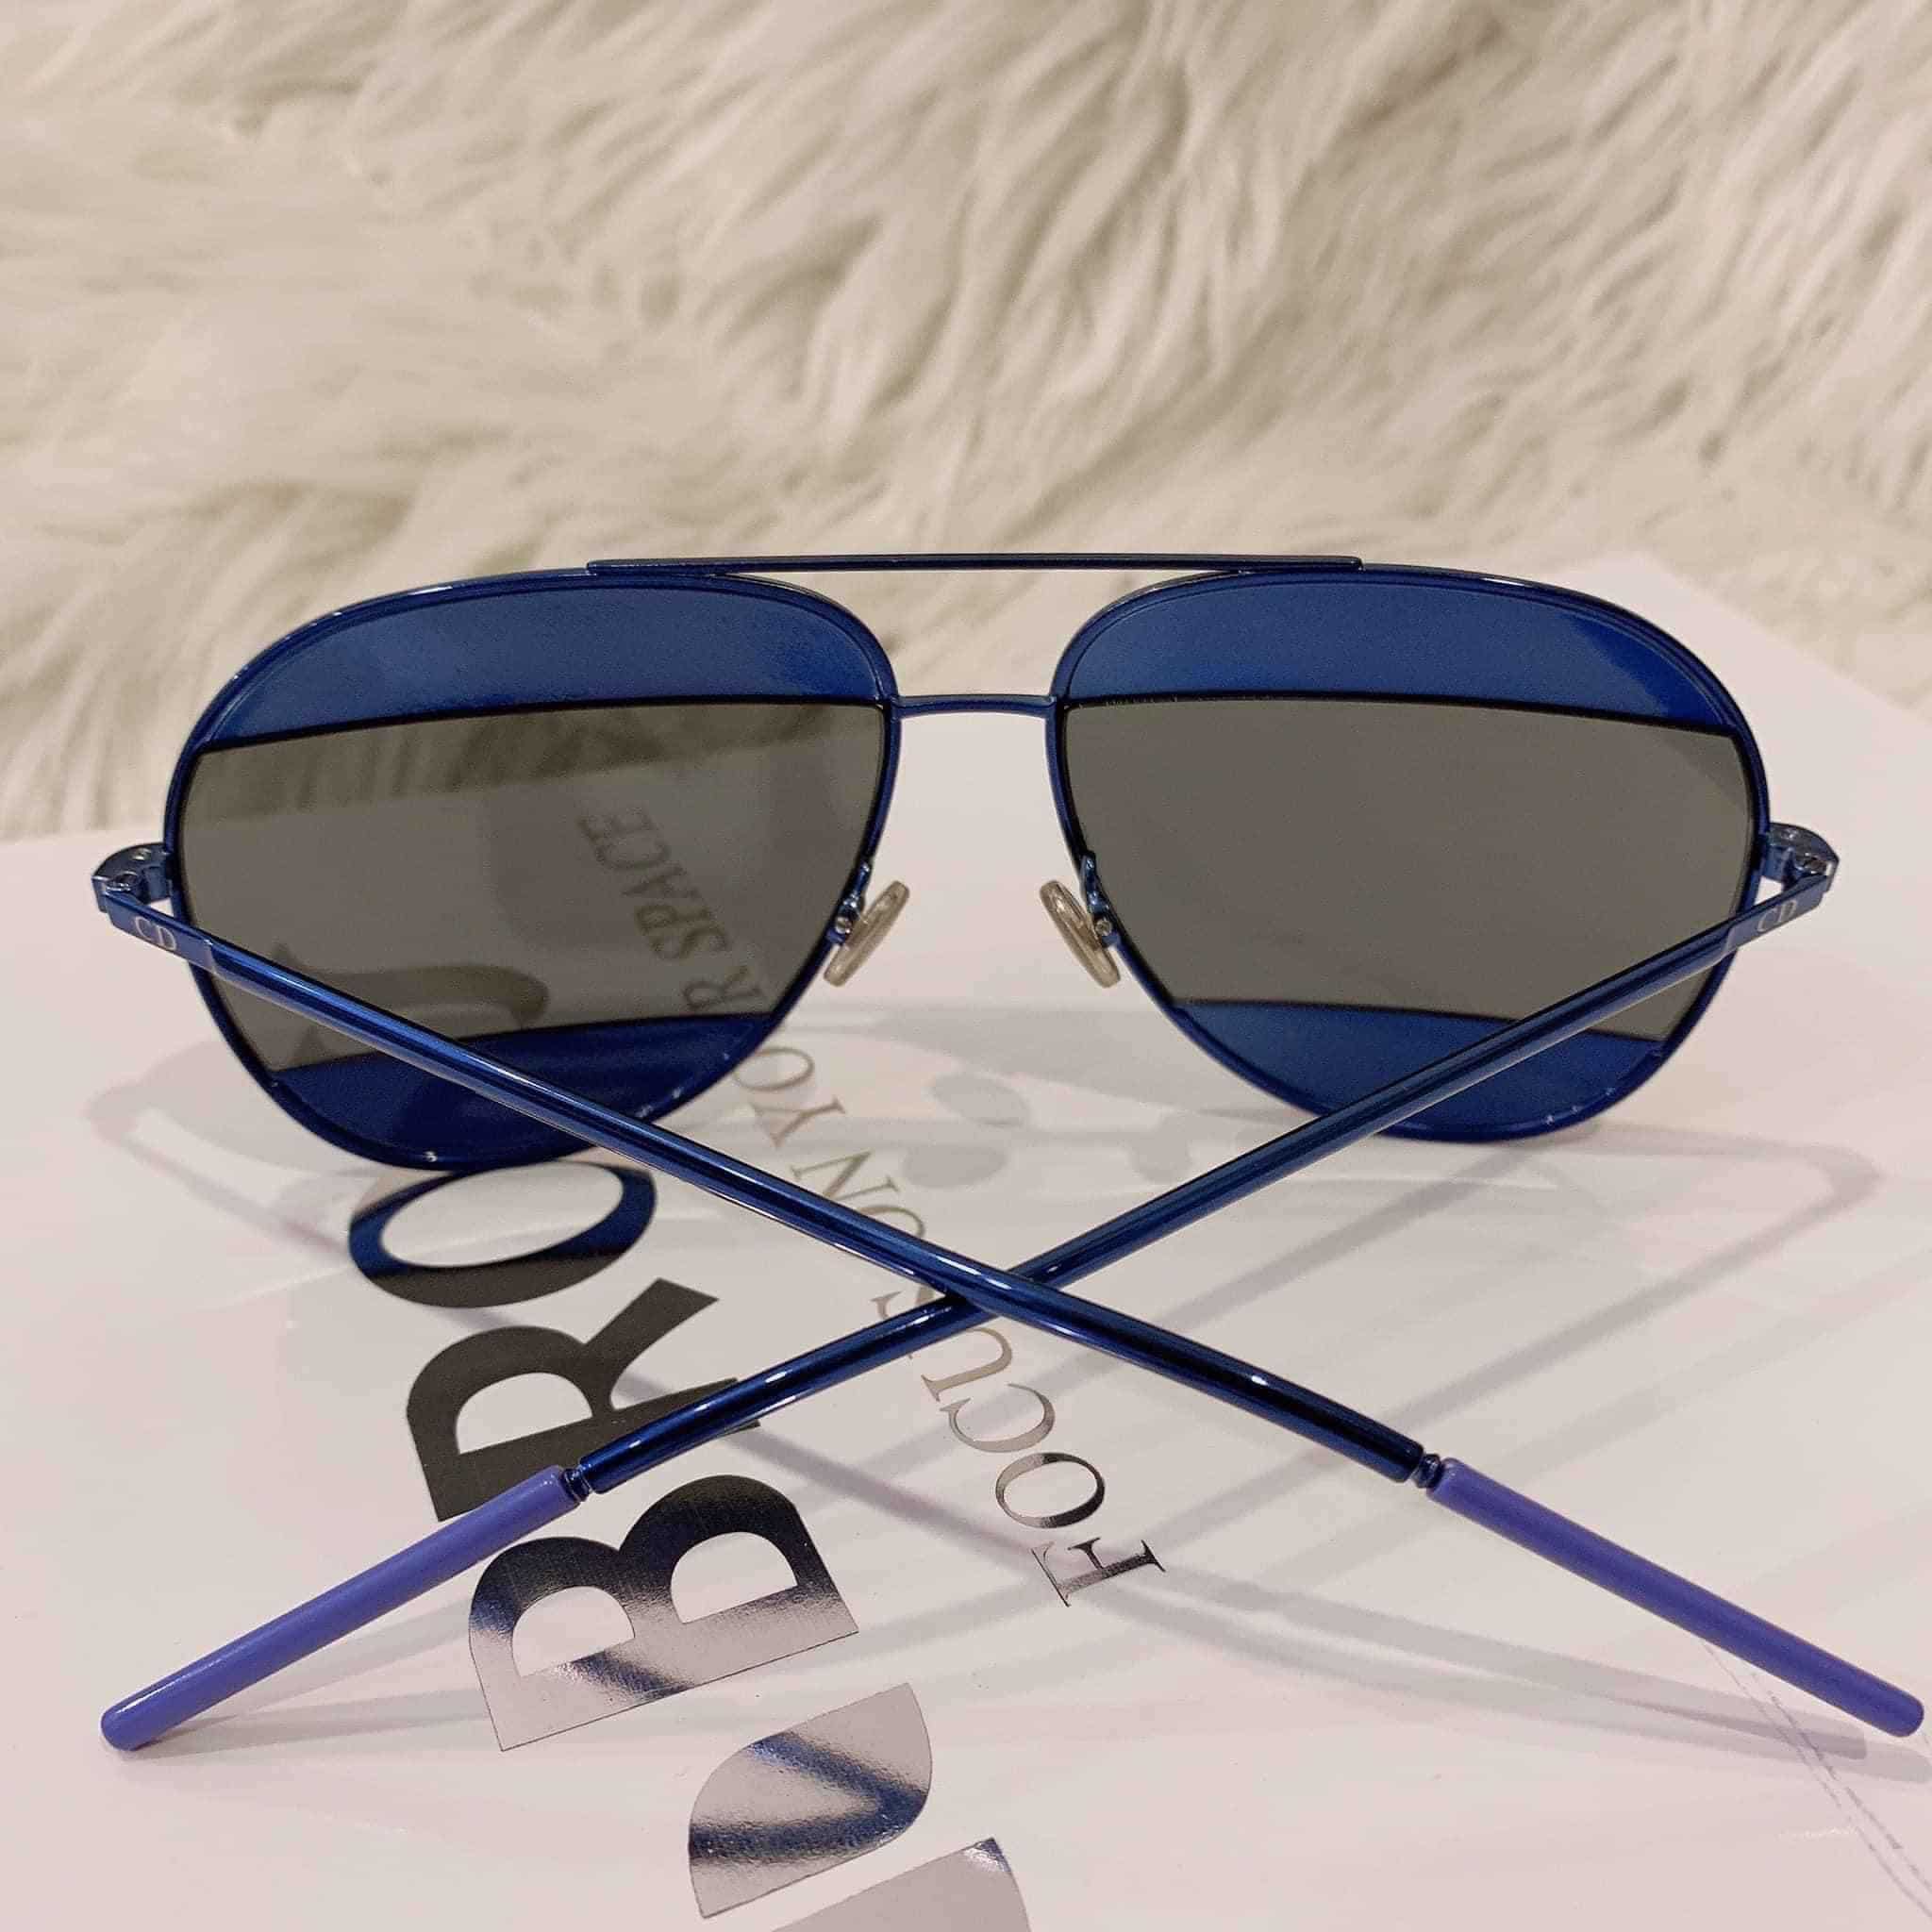 Christian Dior Split Silver and Gold Mirror Aviator Sunglasses  I MISS YOU  VINTAGE